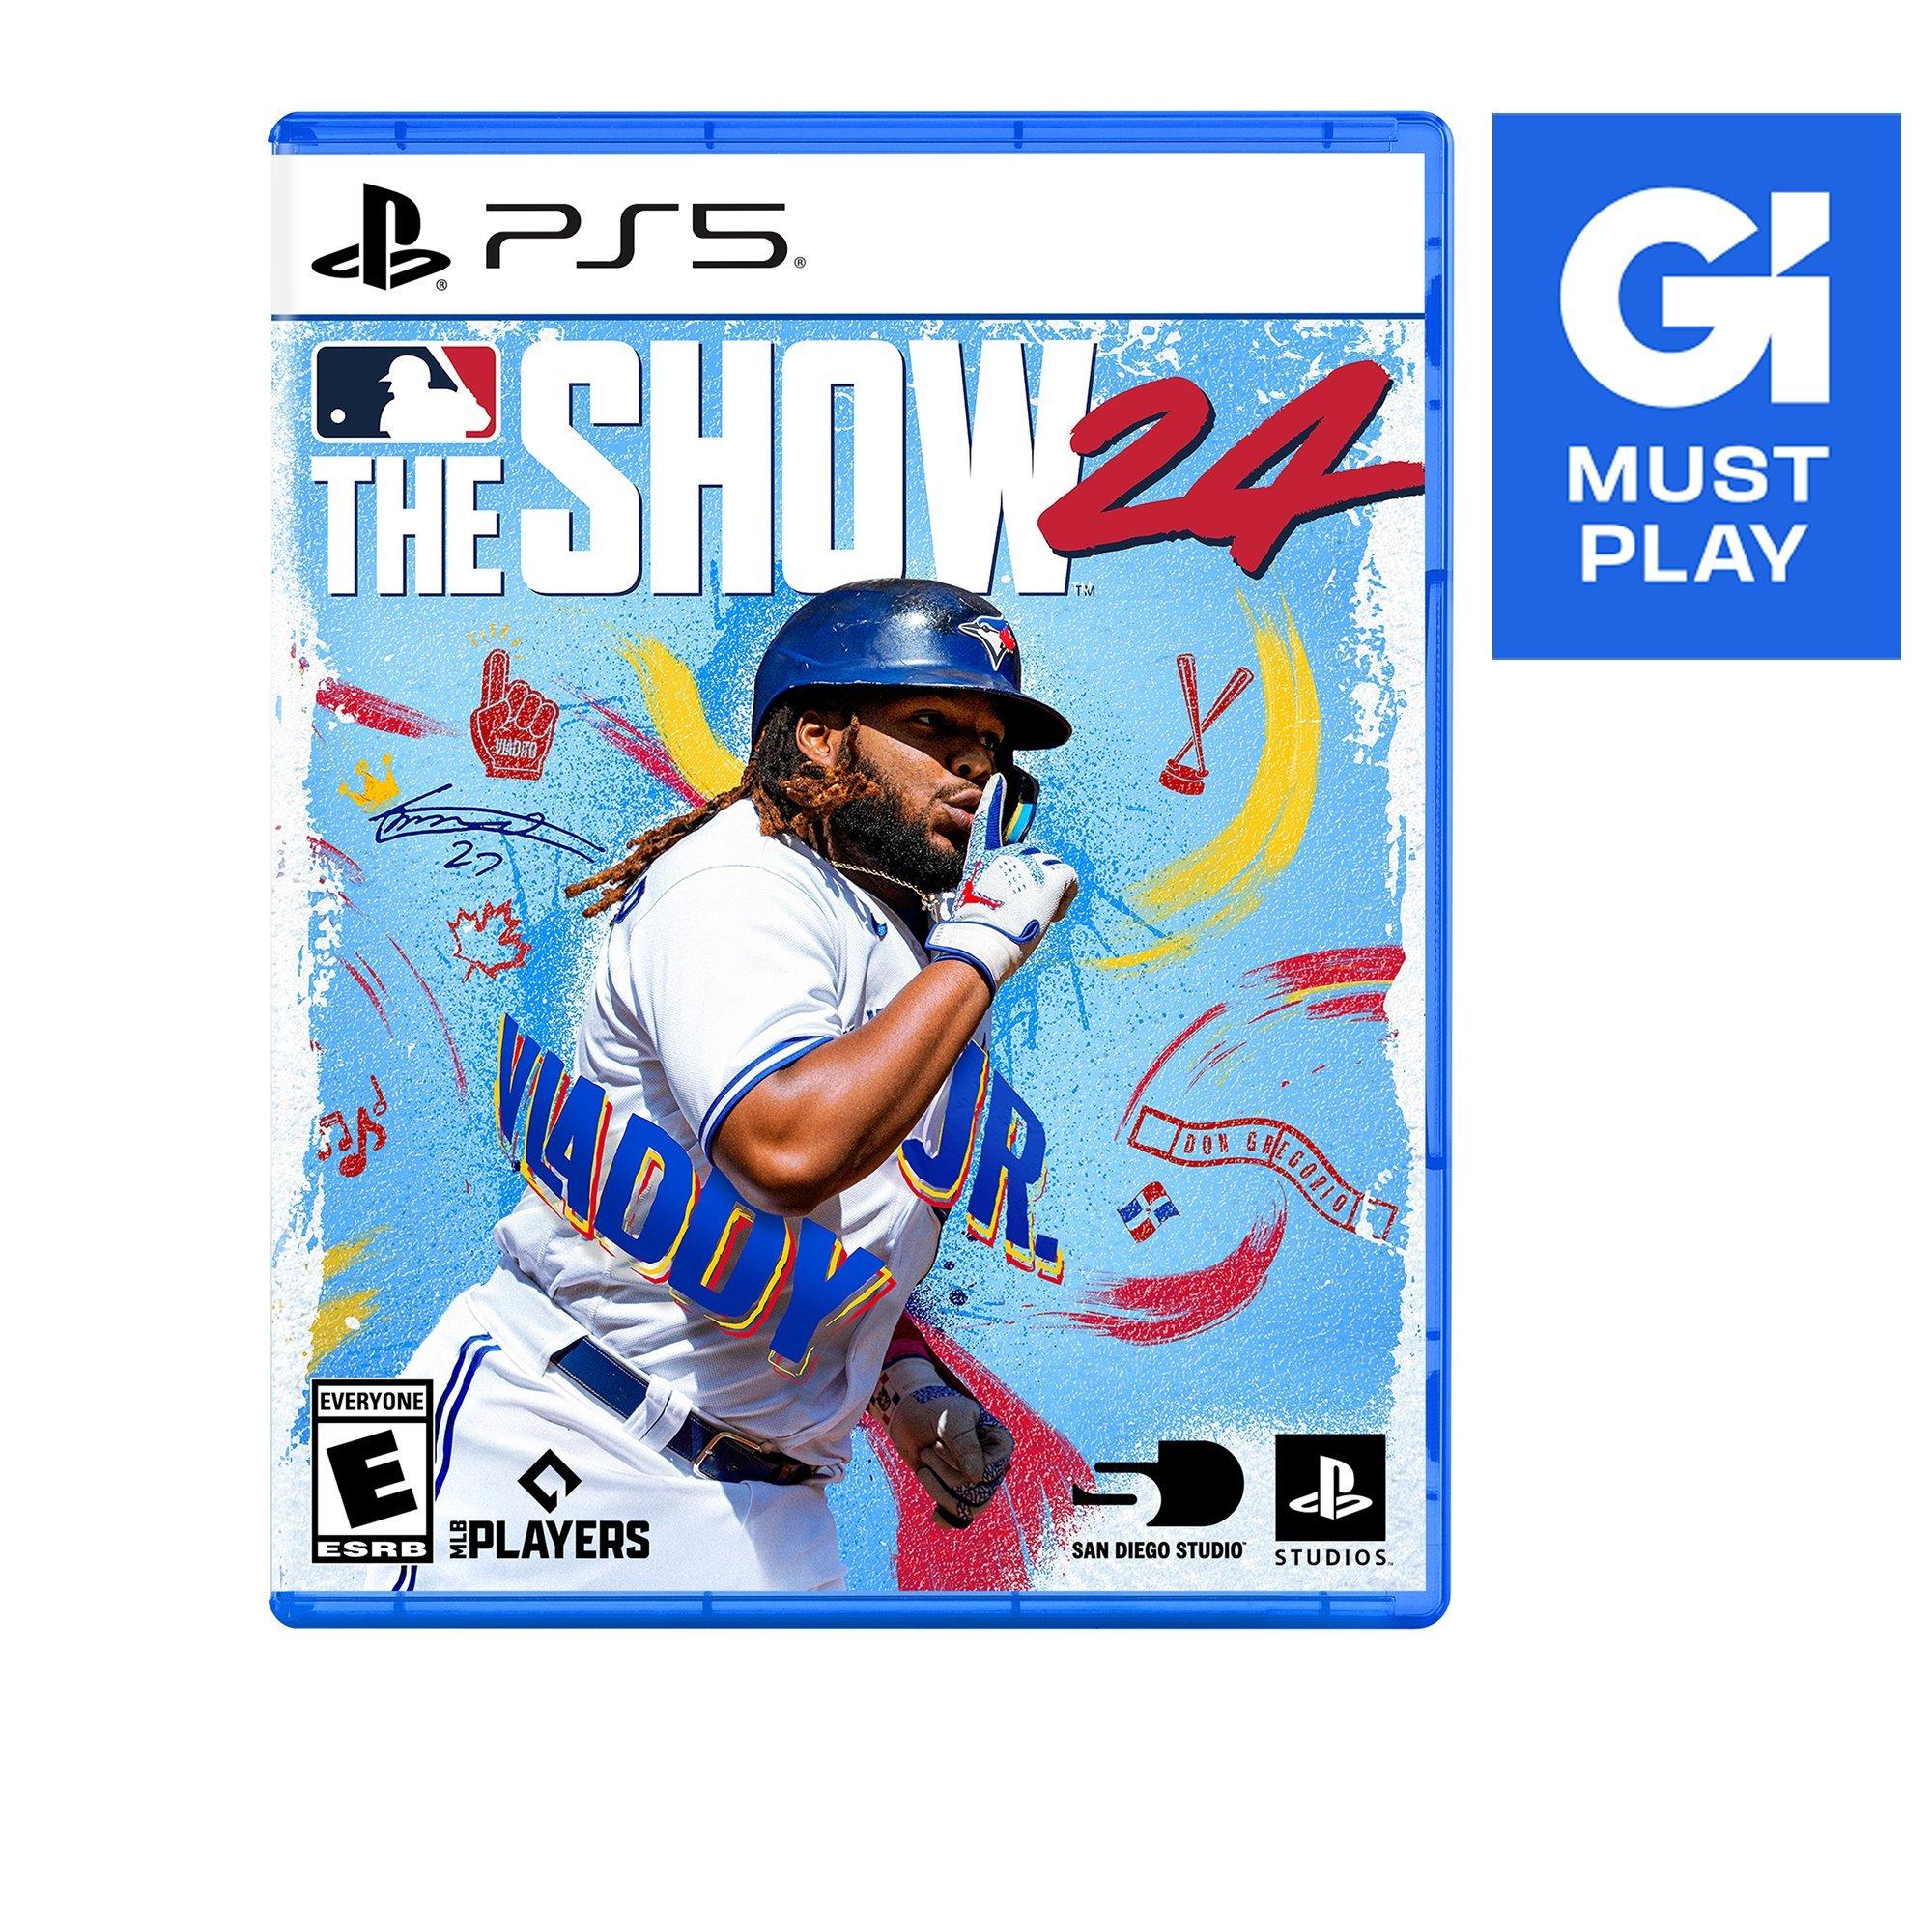 MLB The Show 24 - PlayStation 5